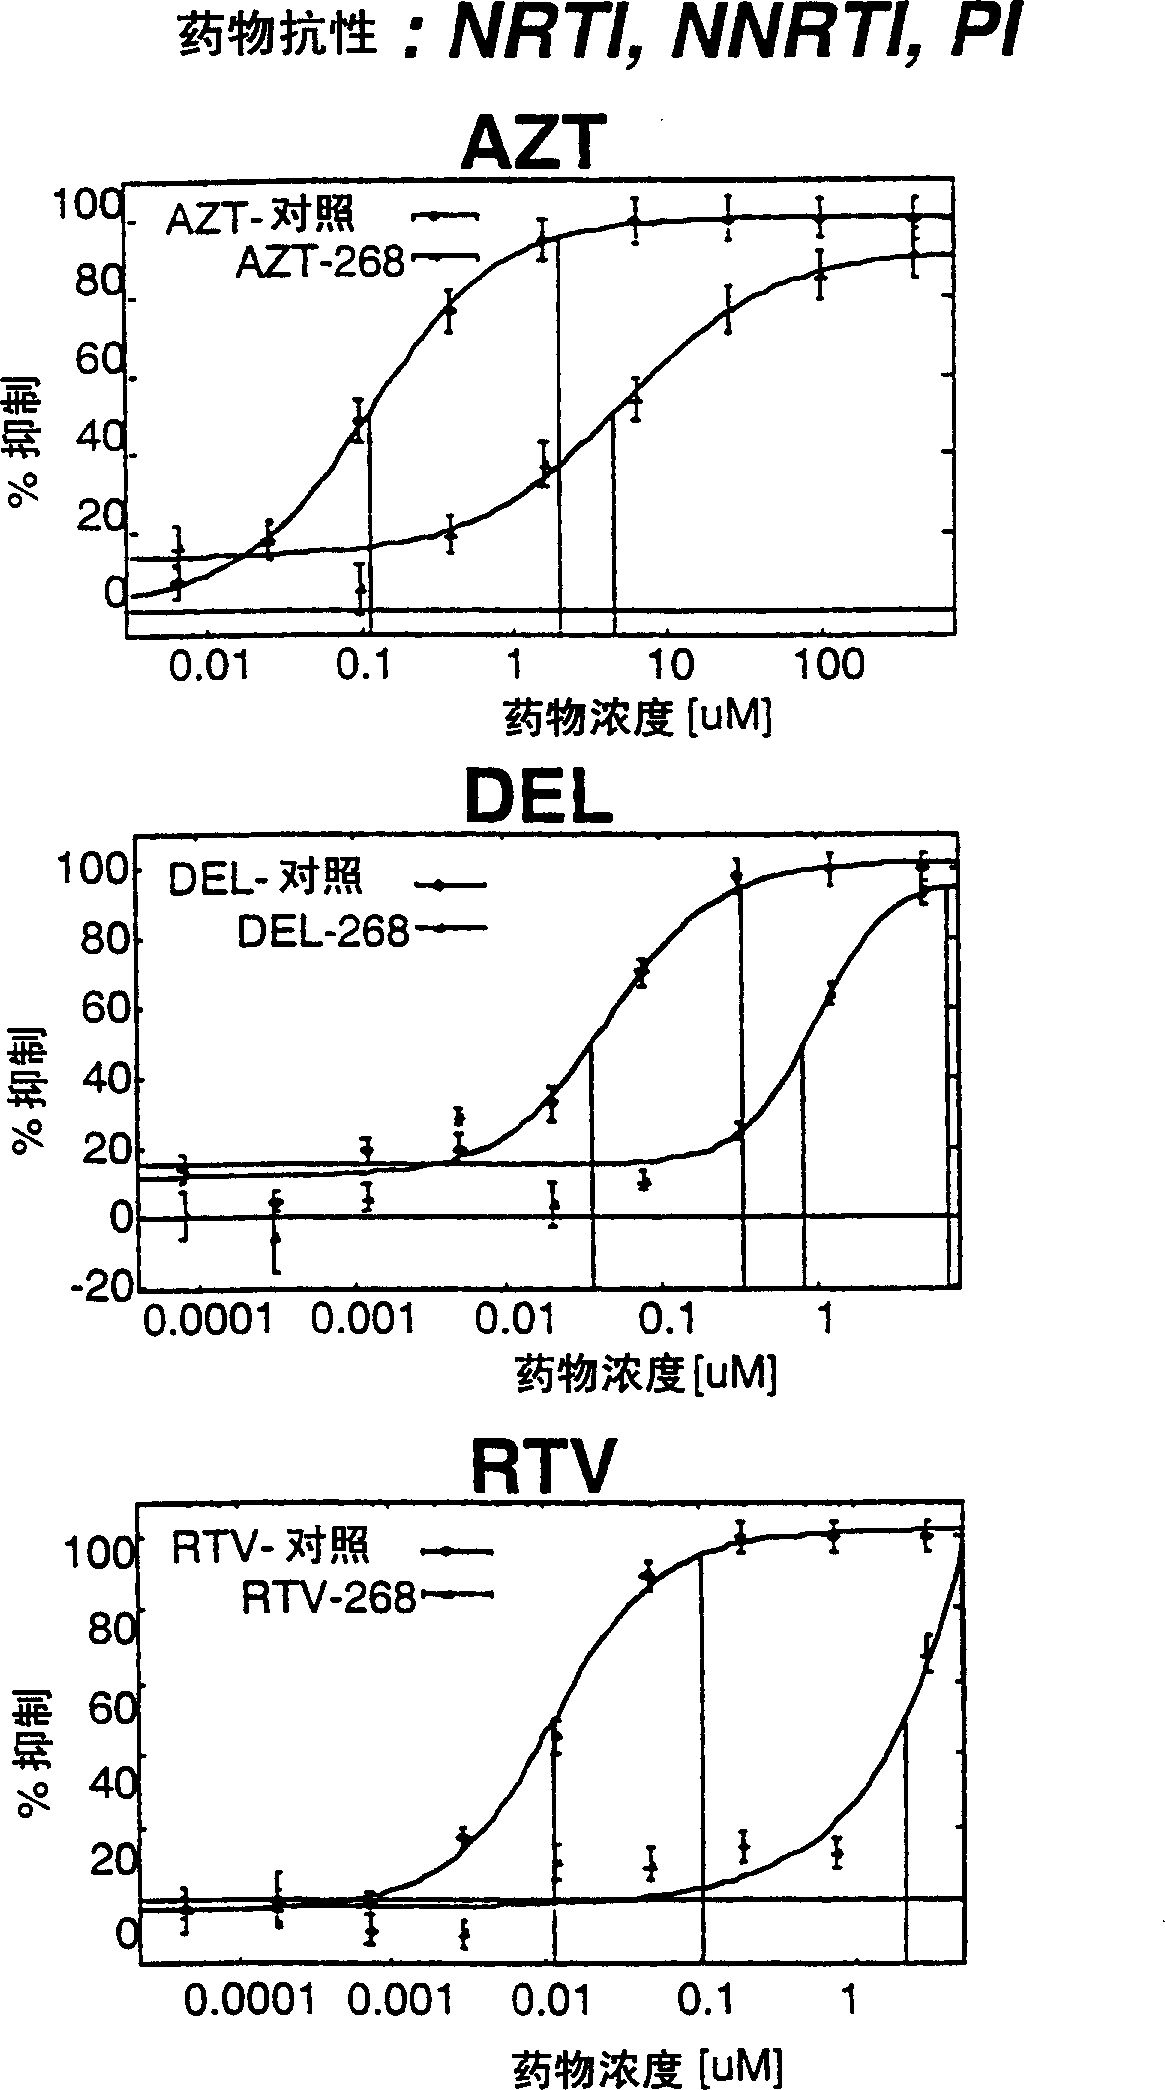 Means and method for monitoring non-nucleoside reverse transcriptase inhibitor antiretroviral therapy